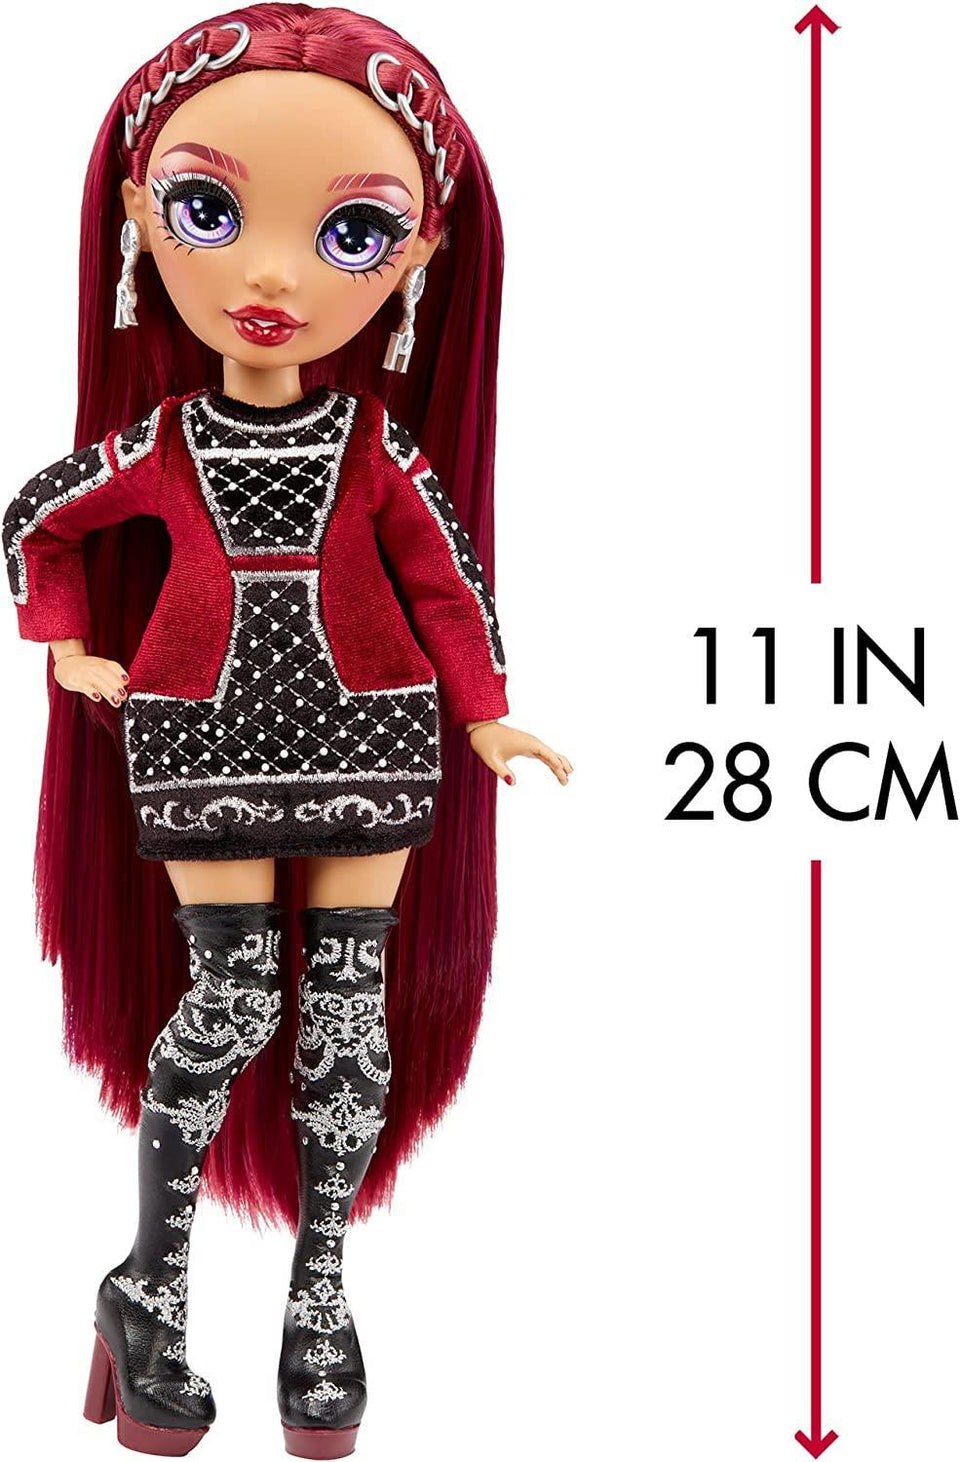 Rainbow High Mila Berrymore CORE S4 Fashion Doll Red Hair 2 Outfits MGA Entertainment